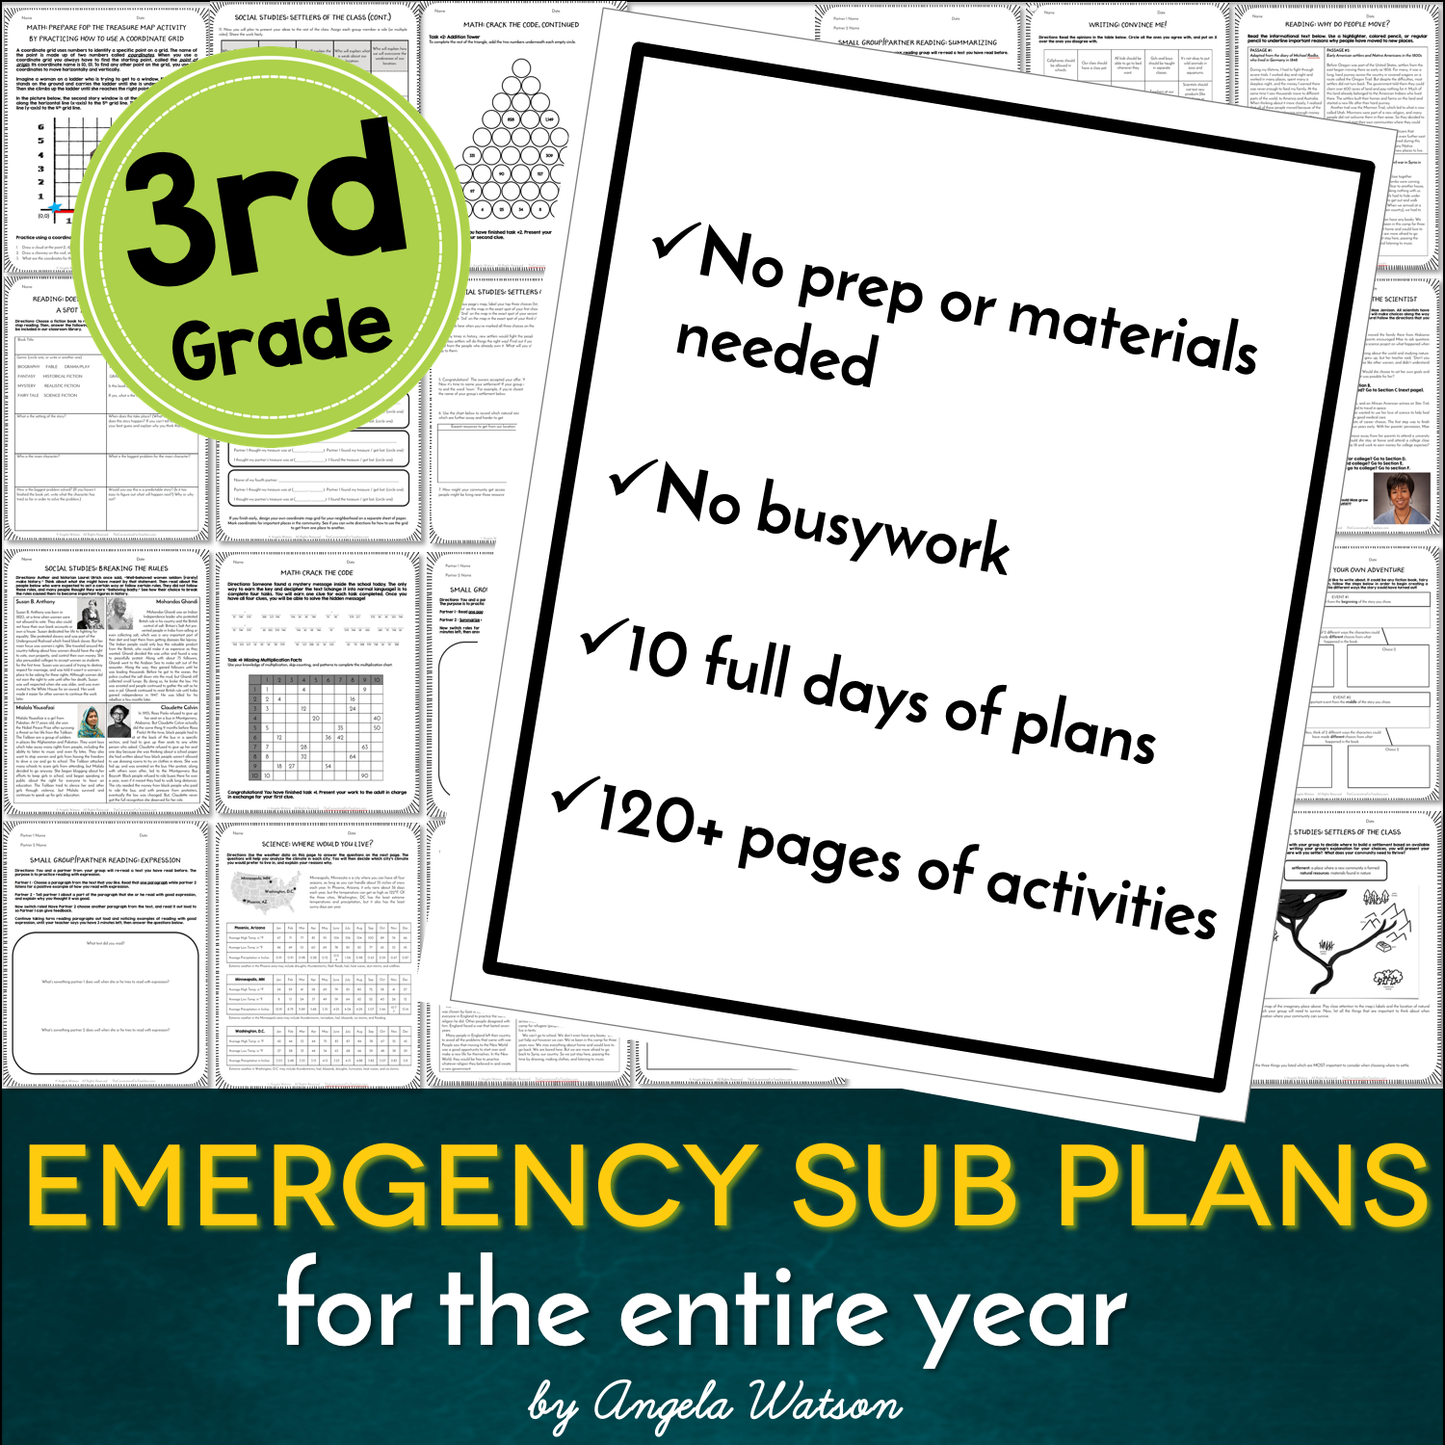 3rd Grade Sub Plans: EVERYTHING you need for 10 days of absences